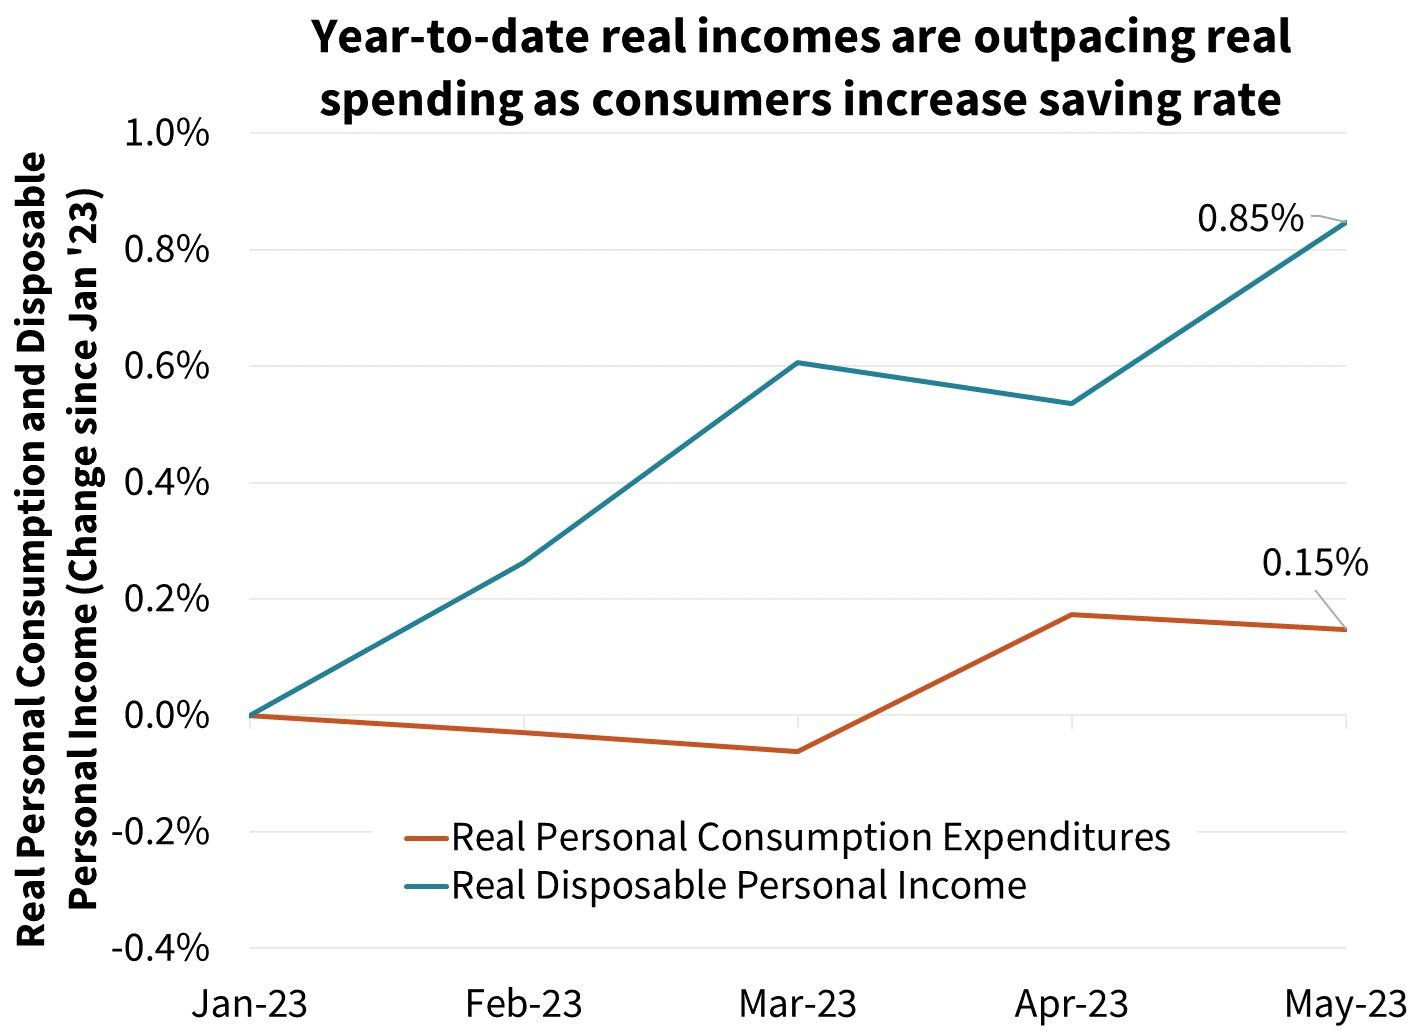 Year-to-date real incomes are outpacing real spending as consumers increase saving rate